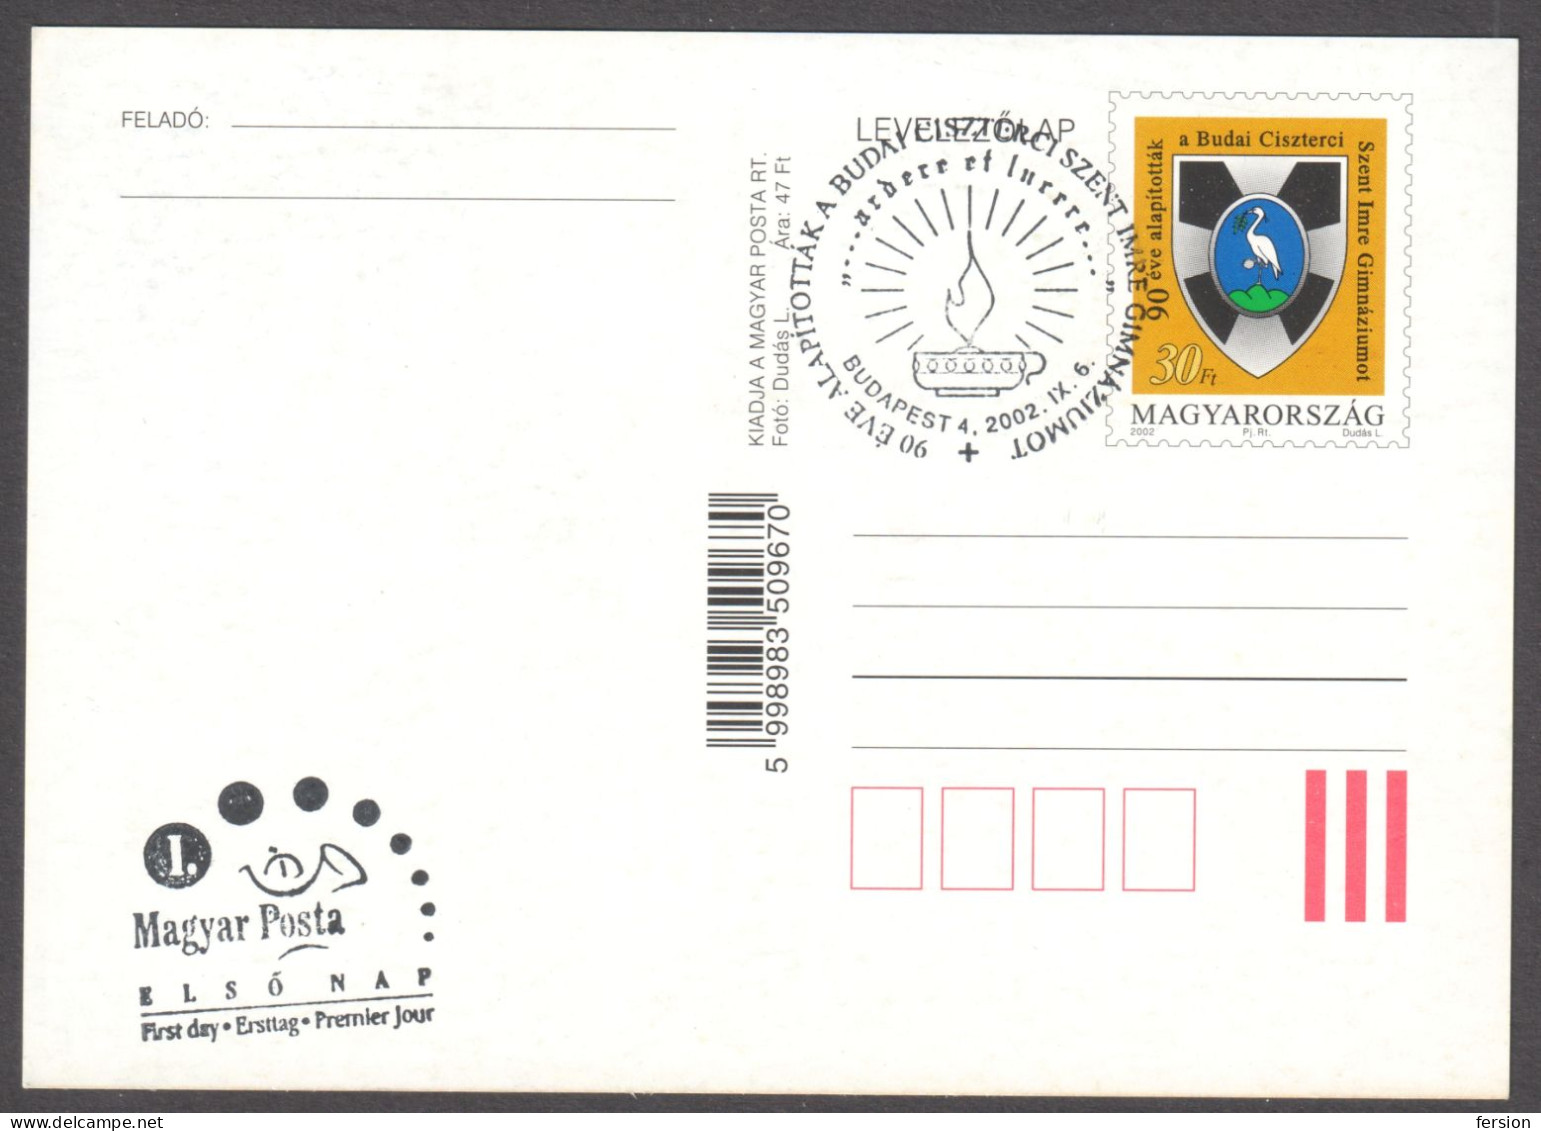 Cistercian Order Gymnasium School 2002 HUNGARY Coat Of Arms Stork Bird STATIONERY POSTCARD Not Used FDC Christianity - Christianity